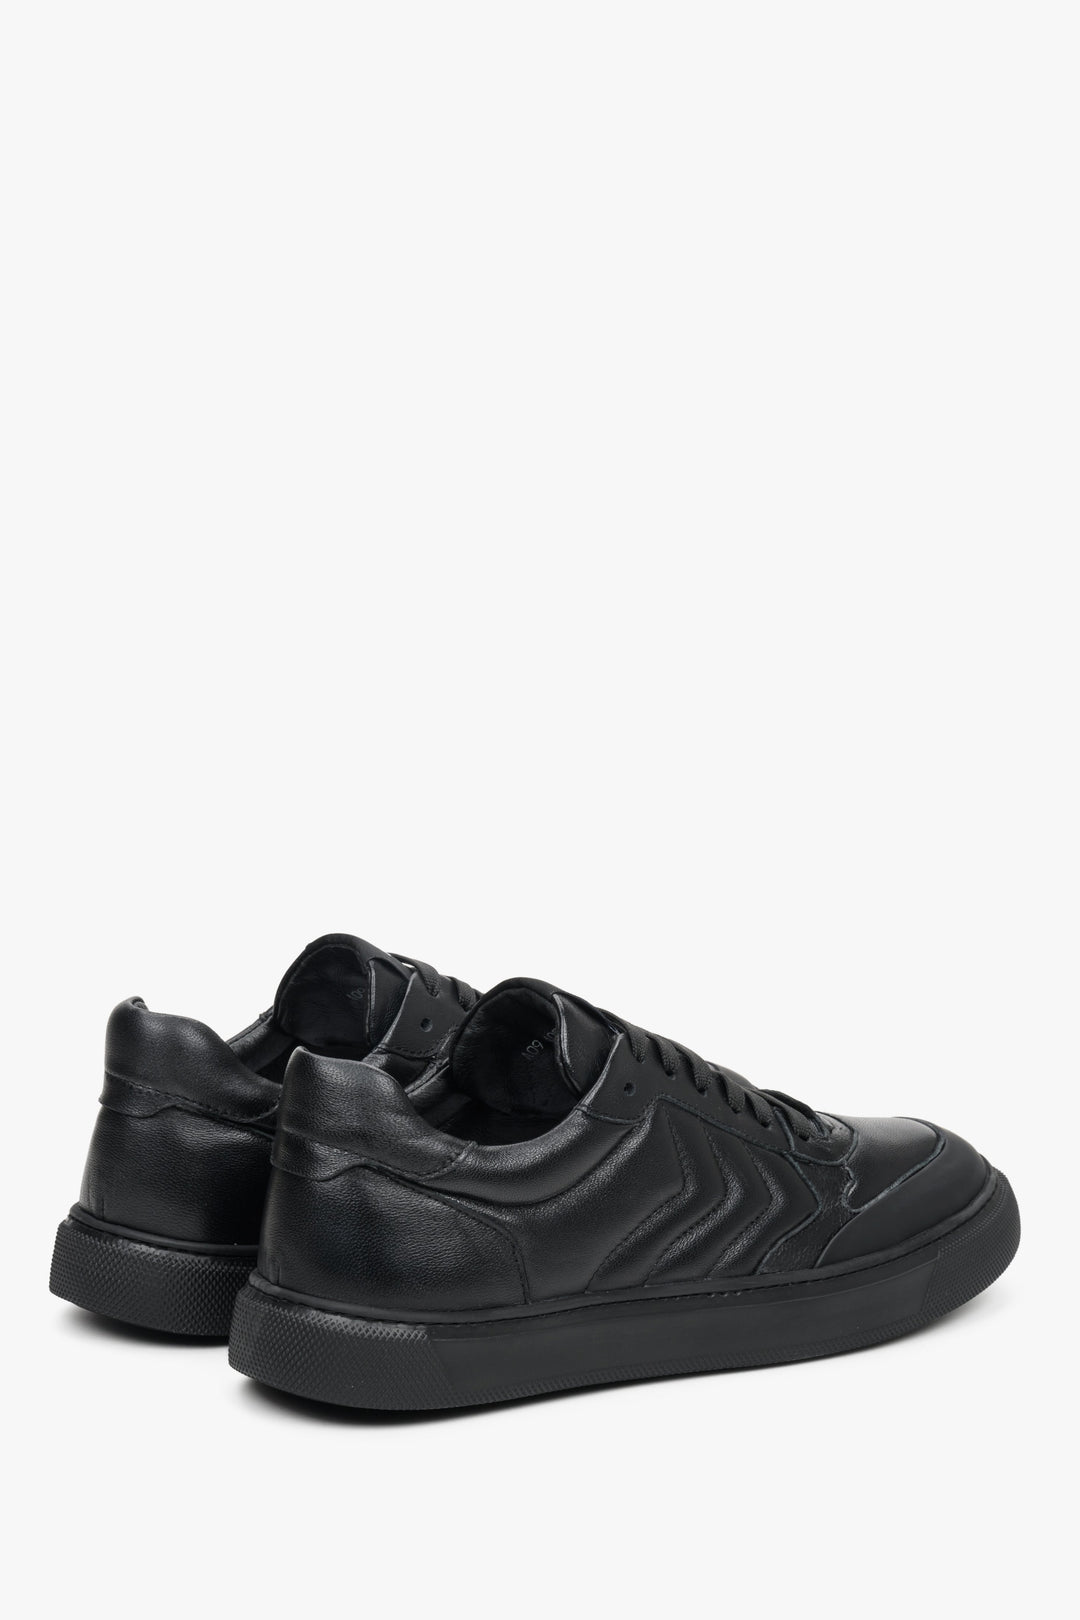 Low men's sneakers for fall made from genuine black leather by Estro - close-up of the heel counter and the back part of the upper.